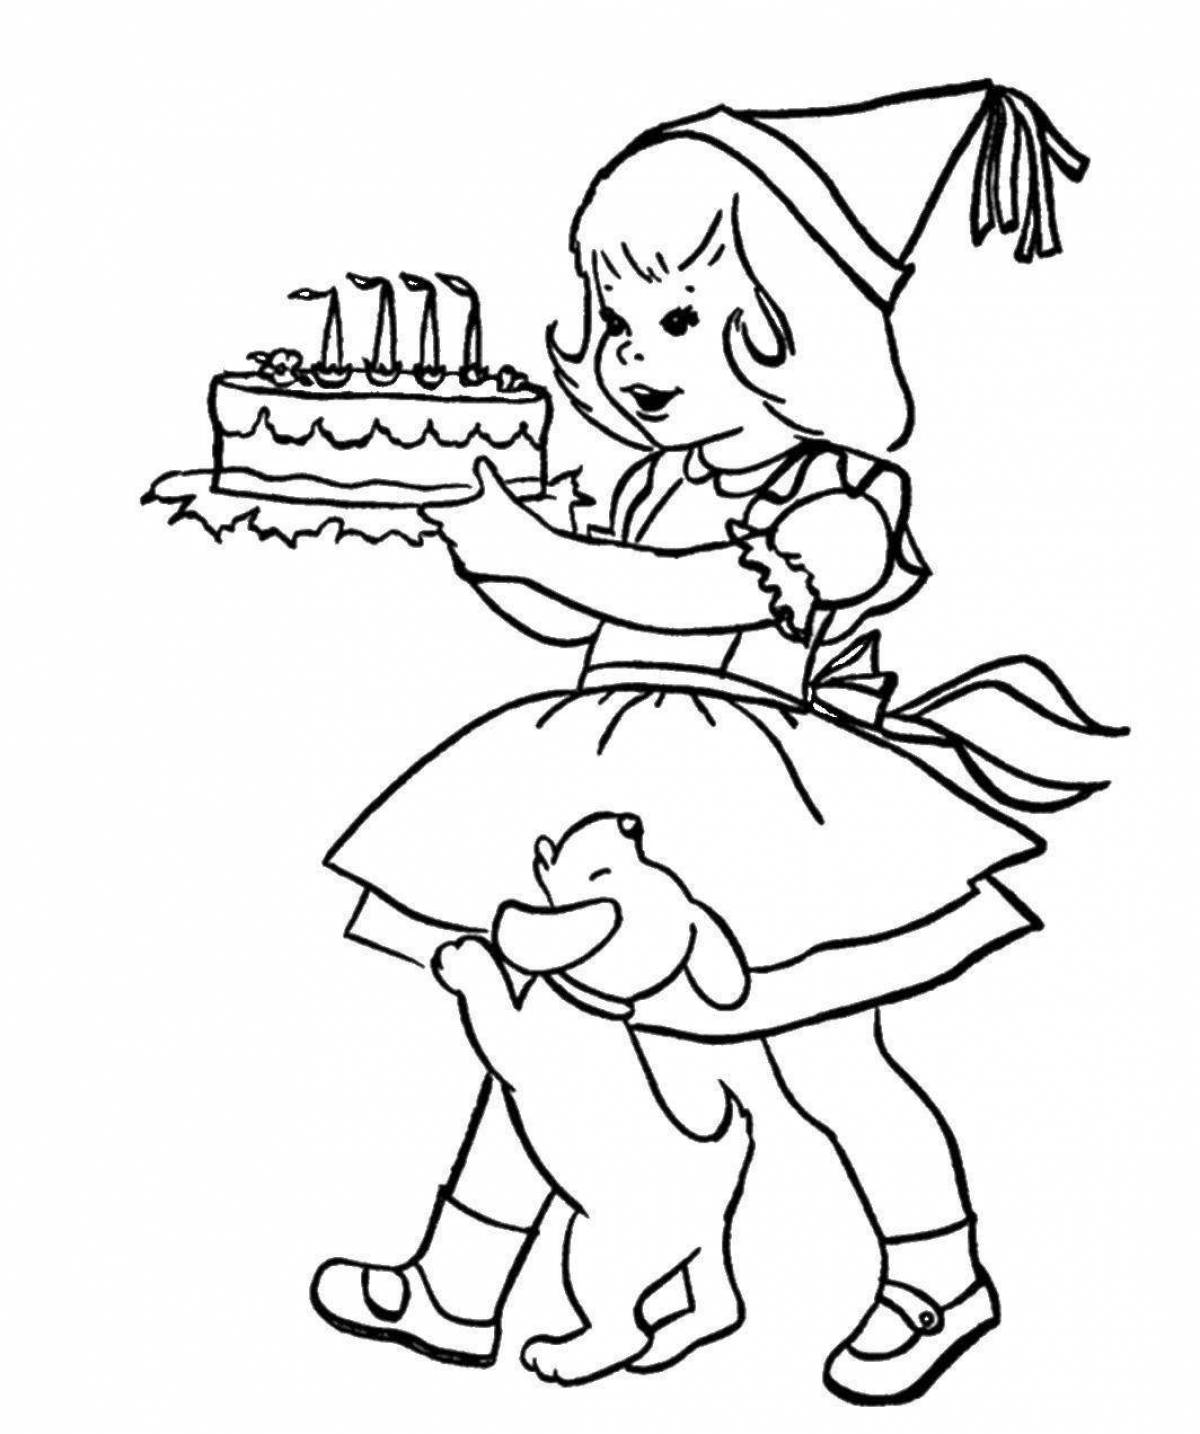 Glorious happy birthday girl coloring page